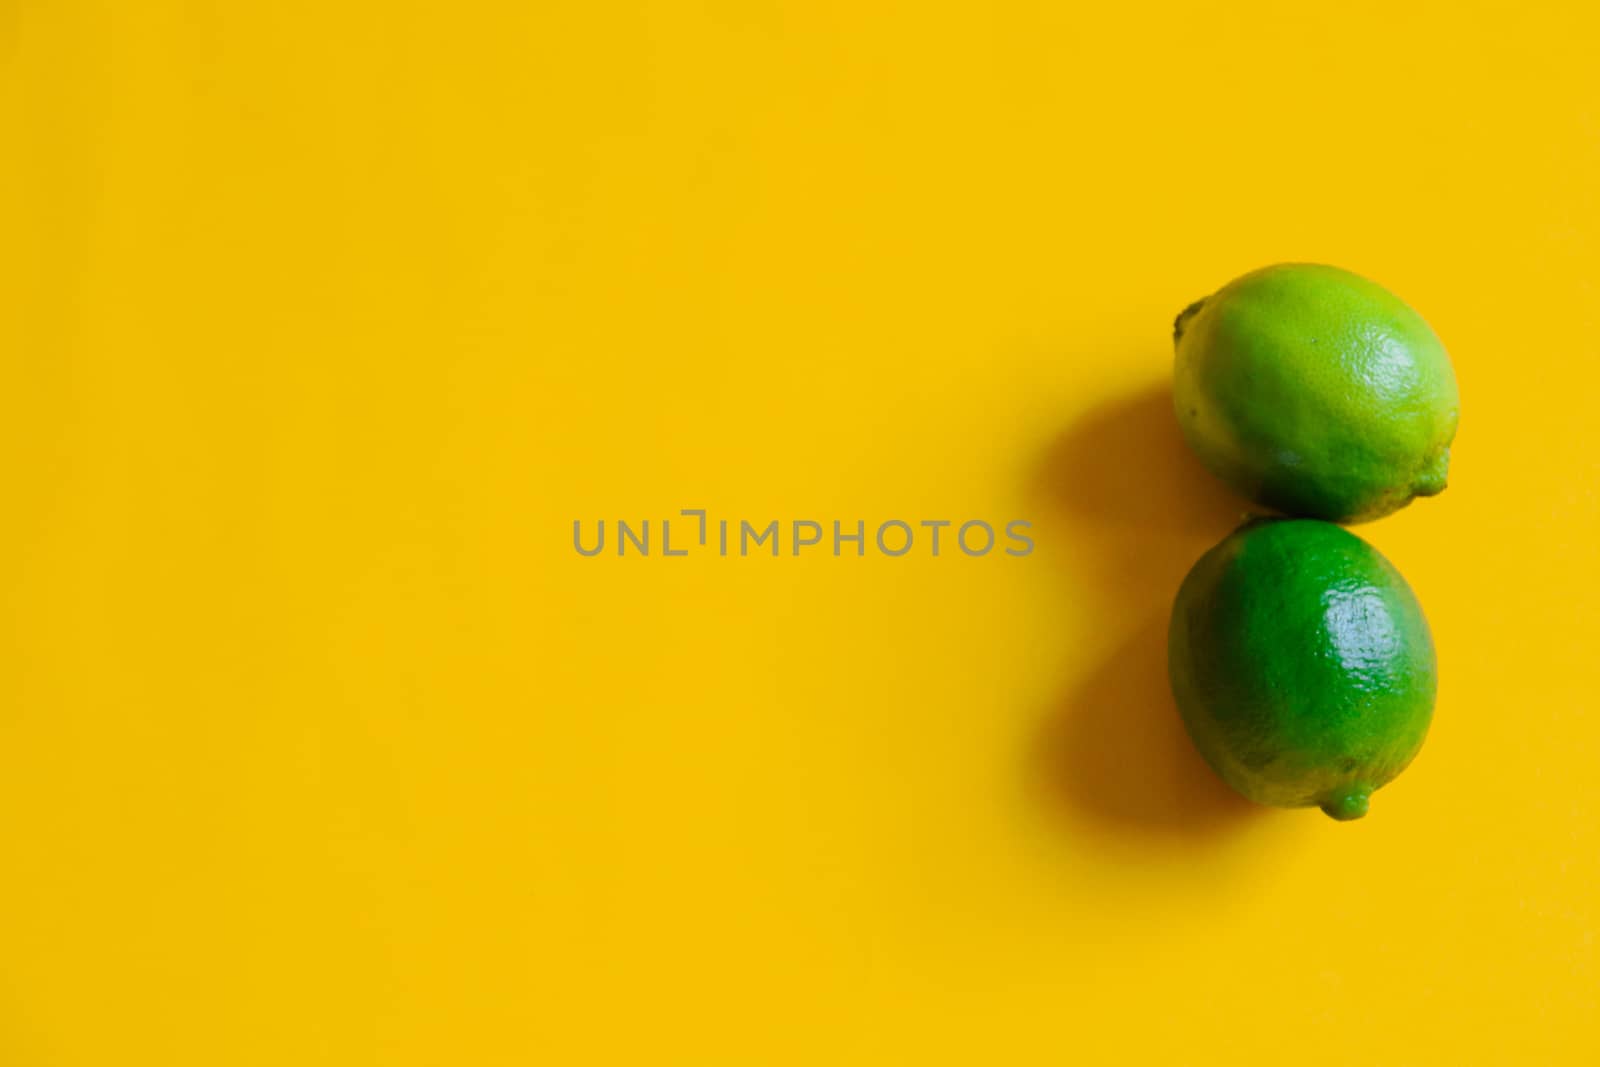 Two green limes against yellow background showing concept of happiness, summer, positivity and life